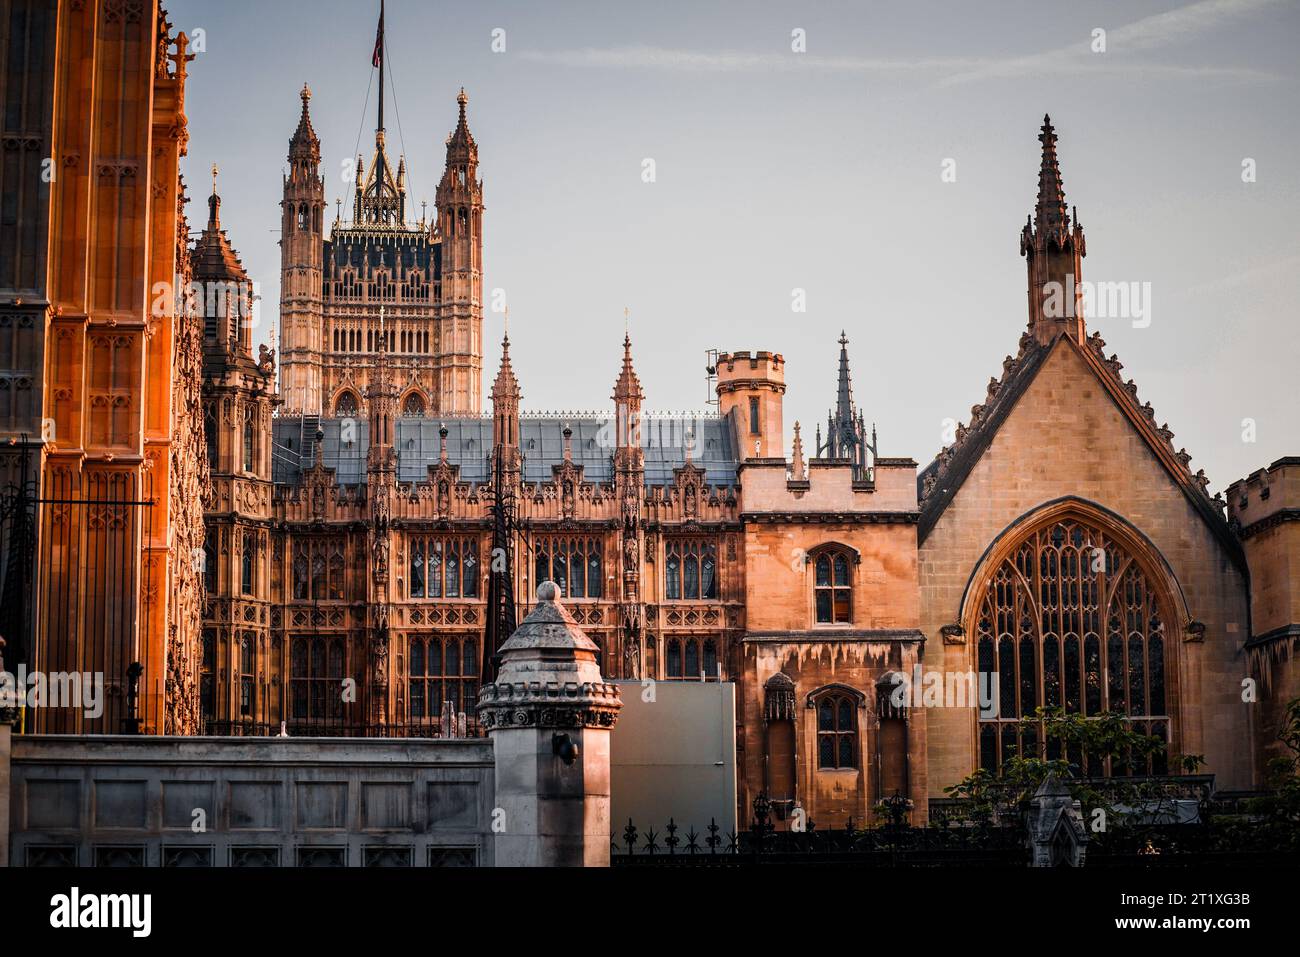 A scenic view of the Houses of Parliament in London, England Stock Photo